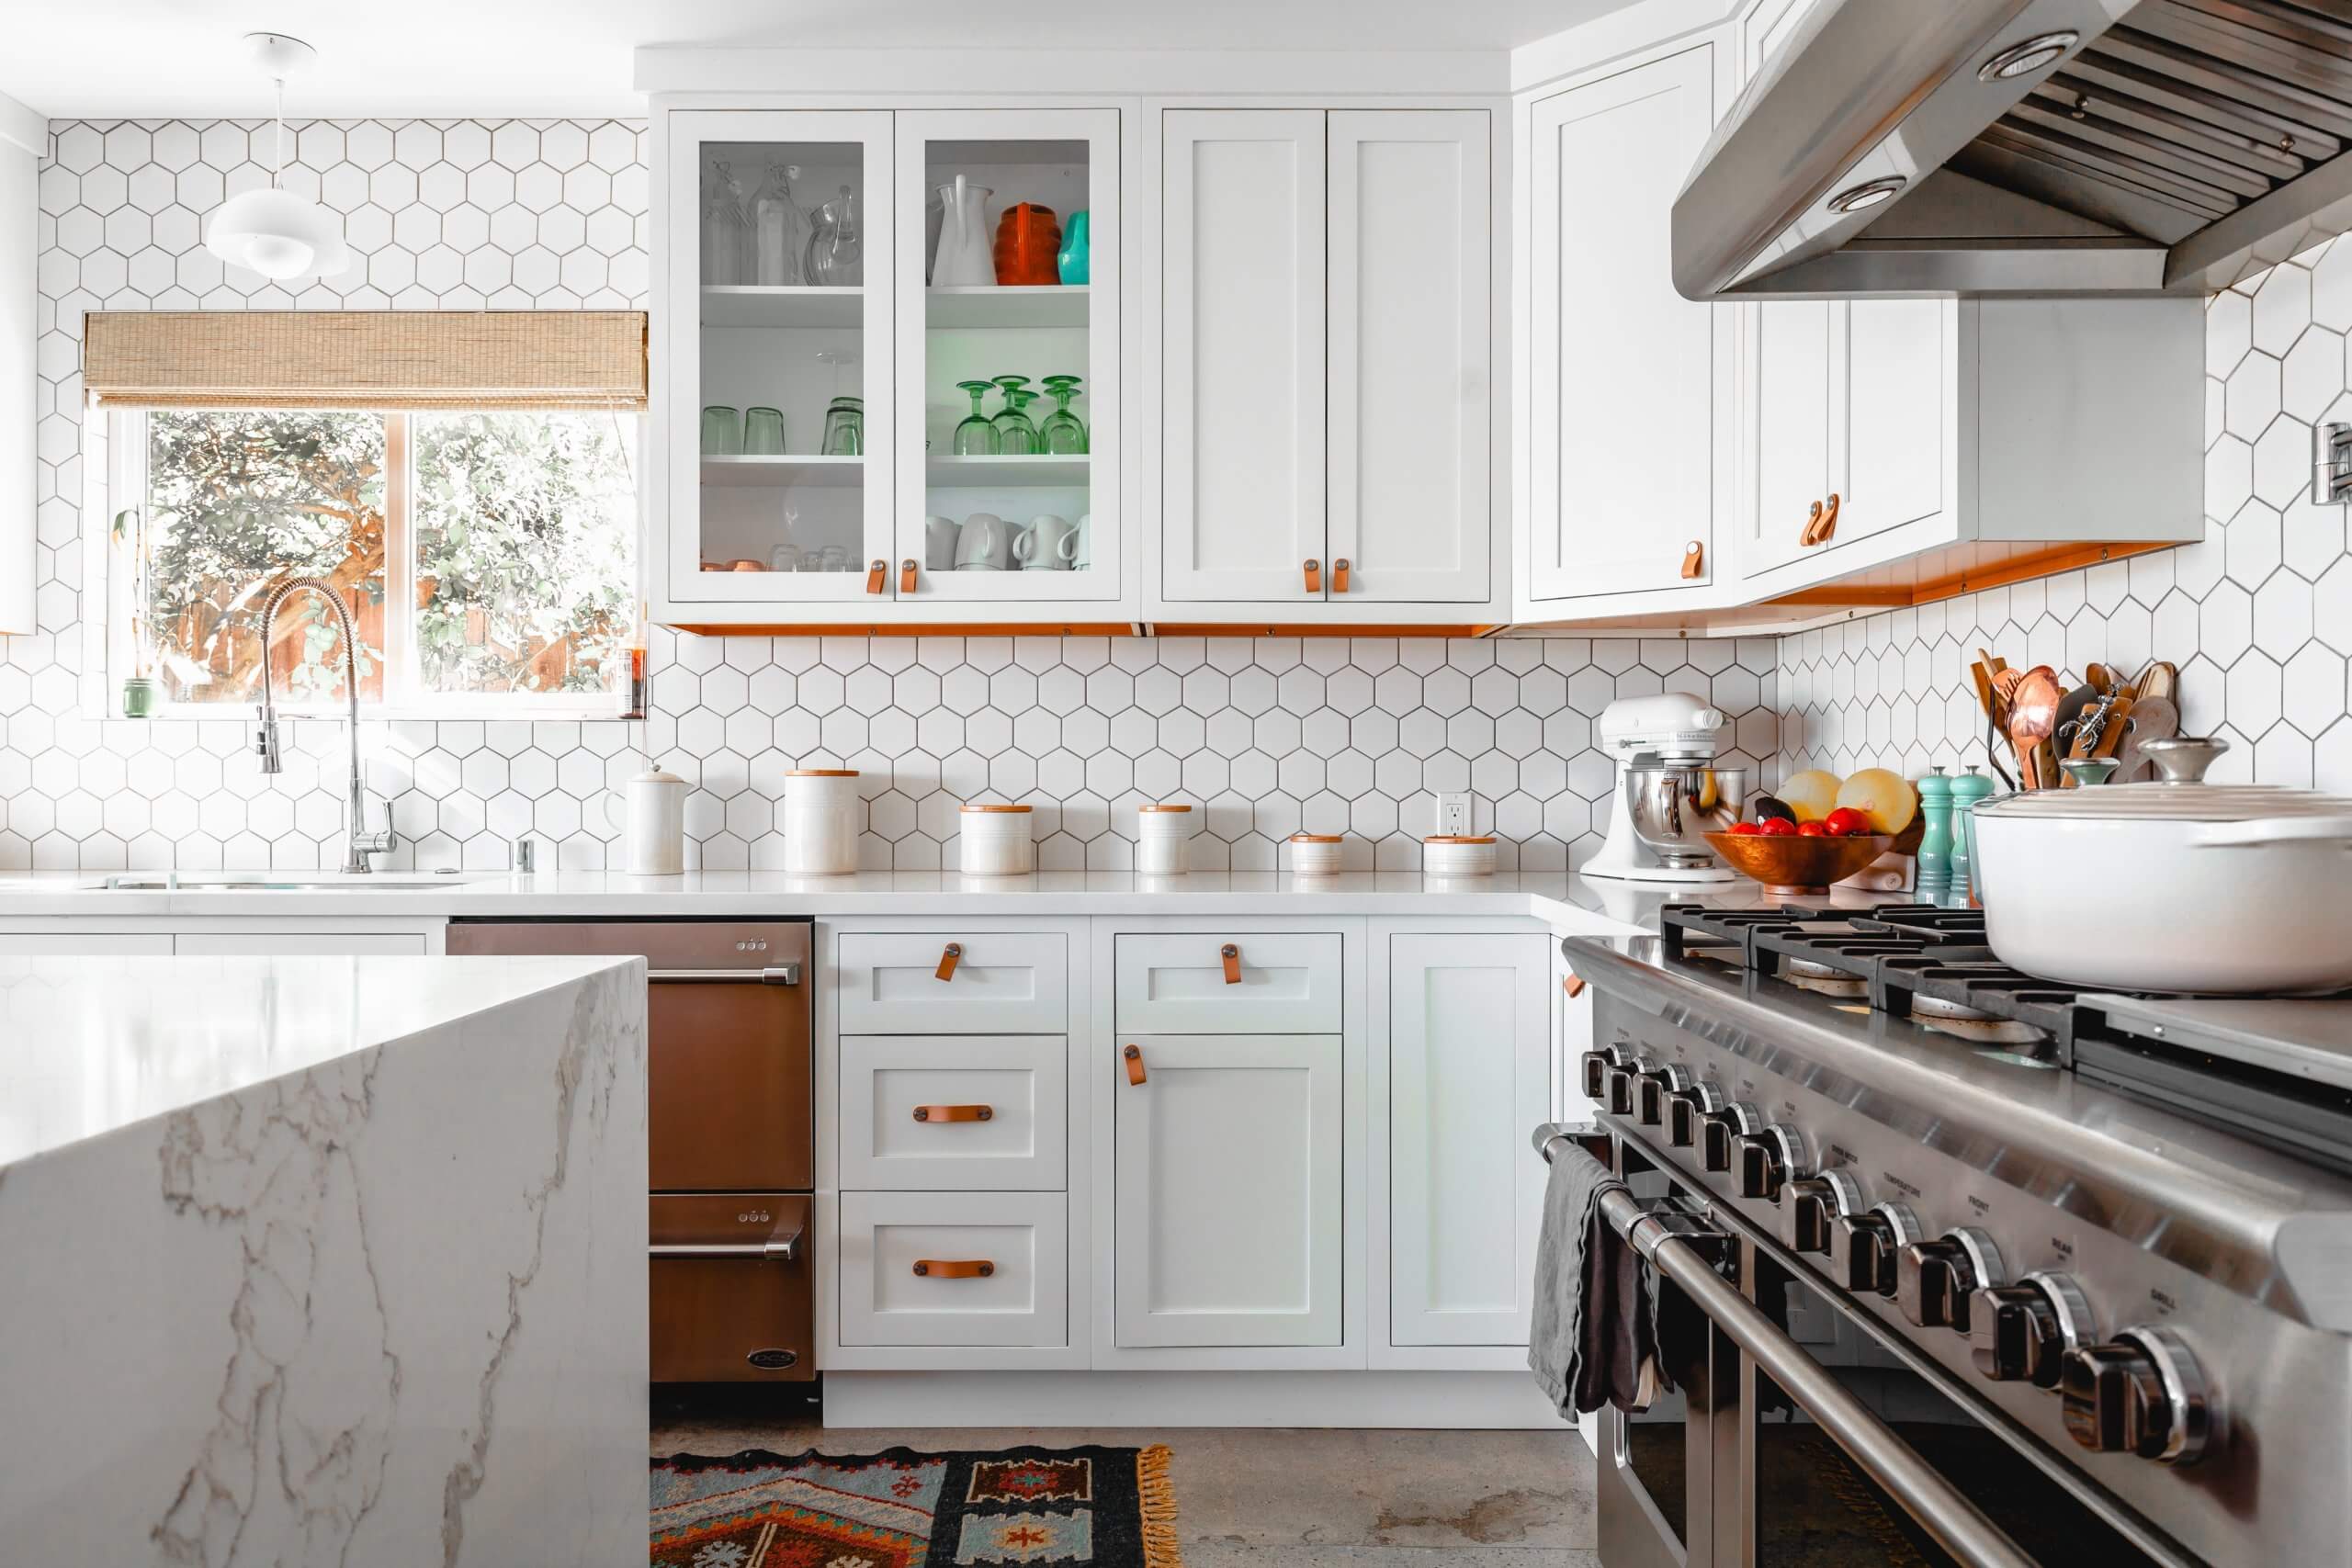 Kitchen Remodeling Project: Countertops